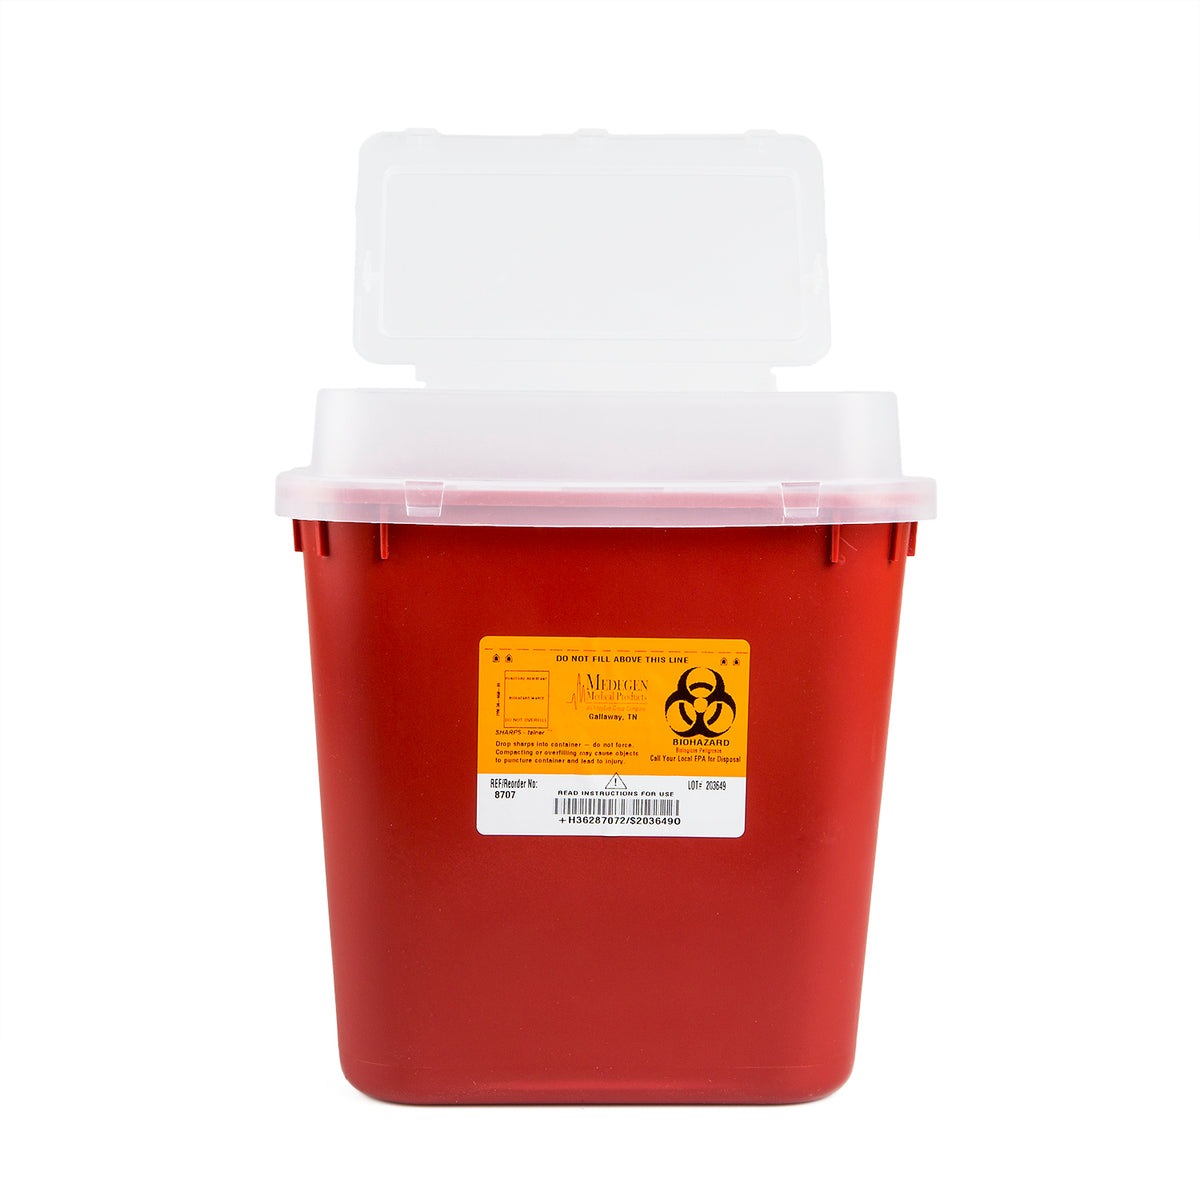 A MedPlus Sharps Container - 2 Gallon (8 Quarts) with a lid, compliant with FDA Quality System Regulations.